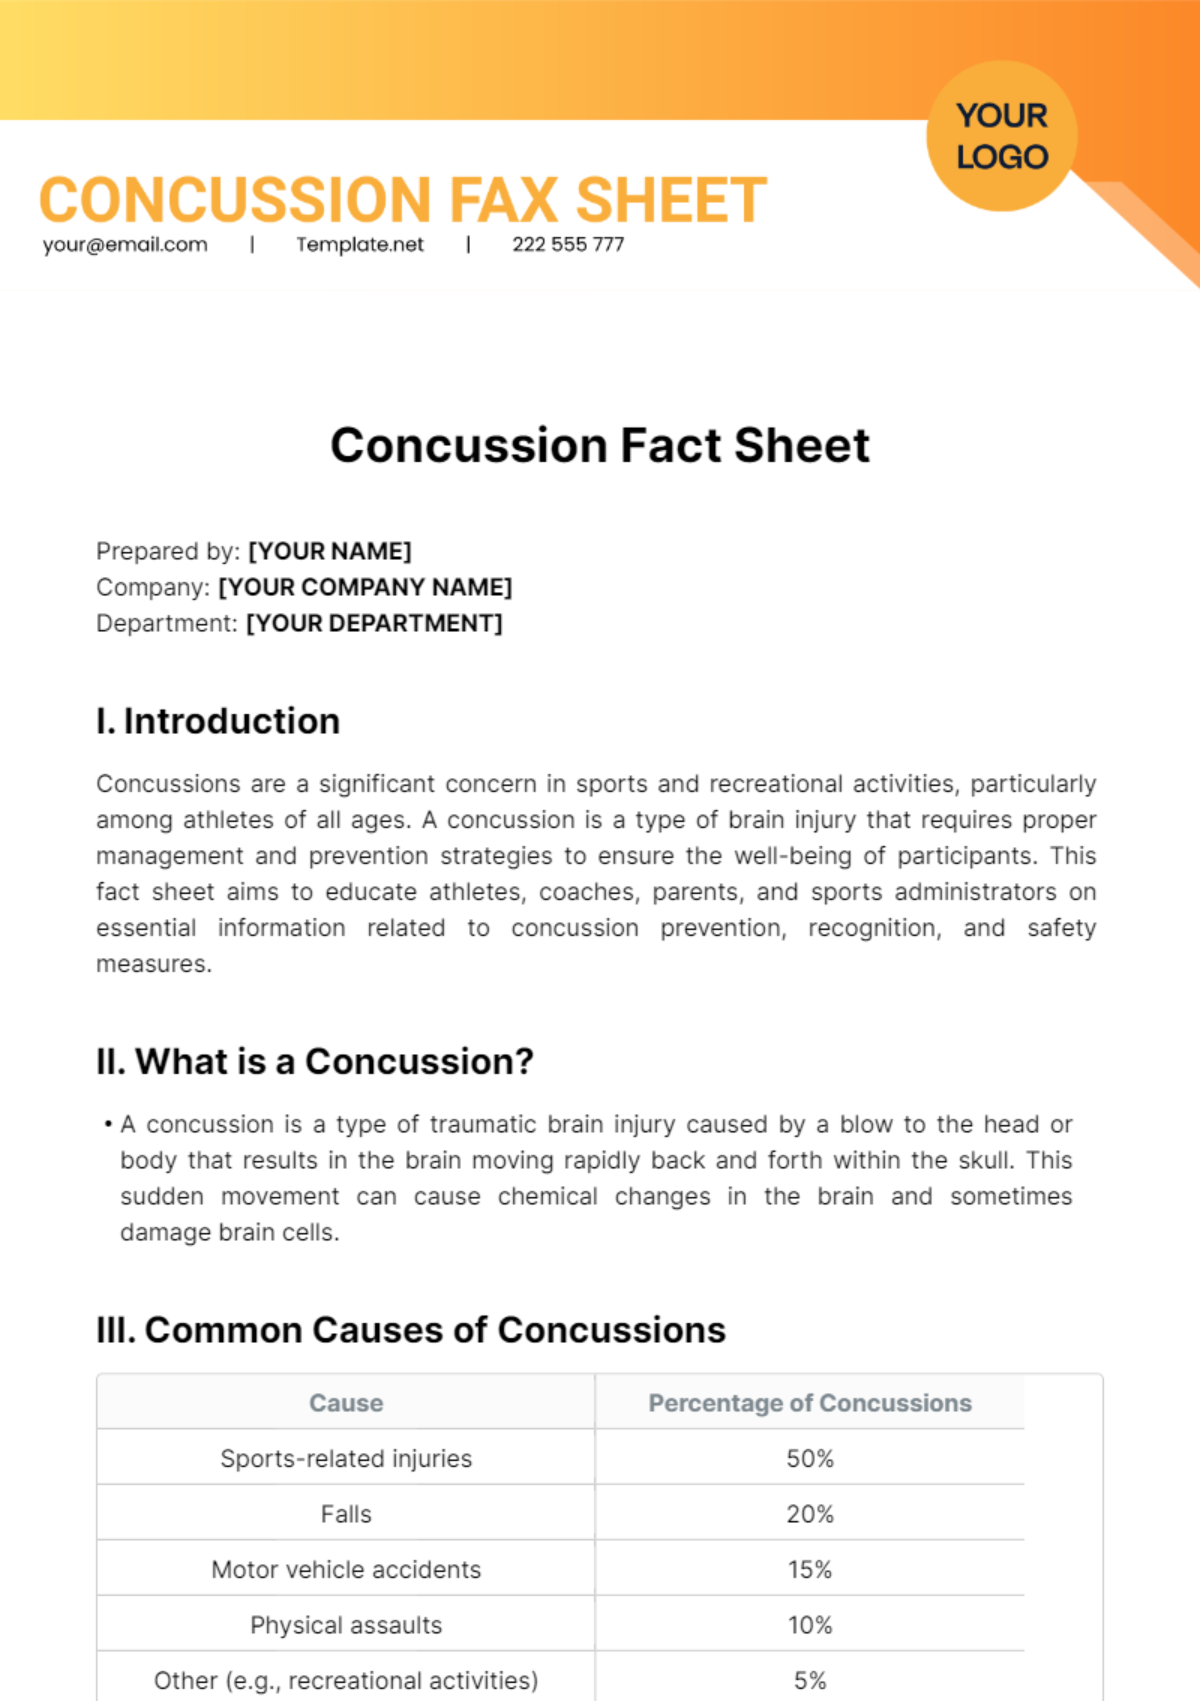 Concussion Fact Sheet Template